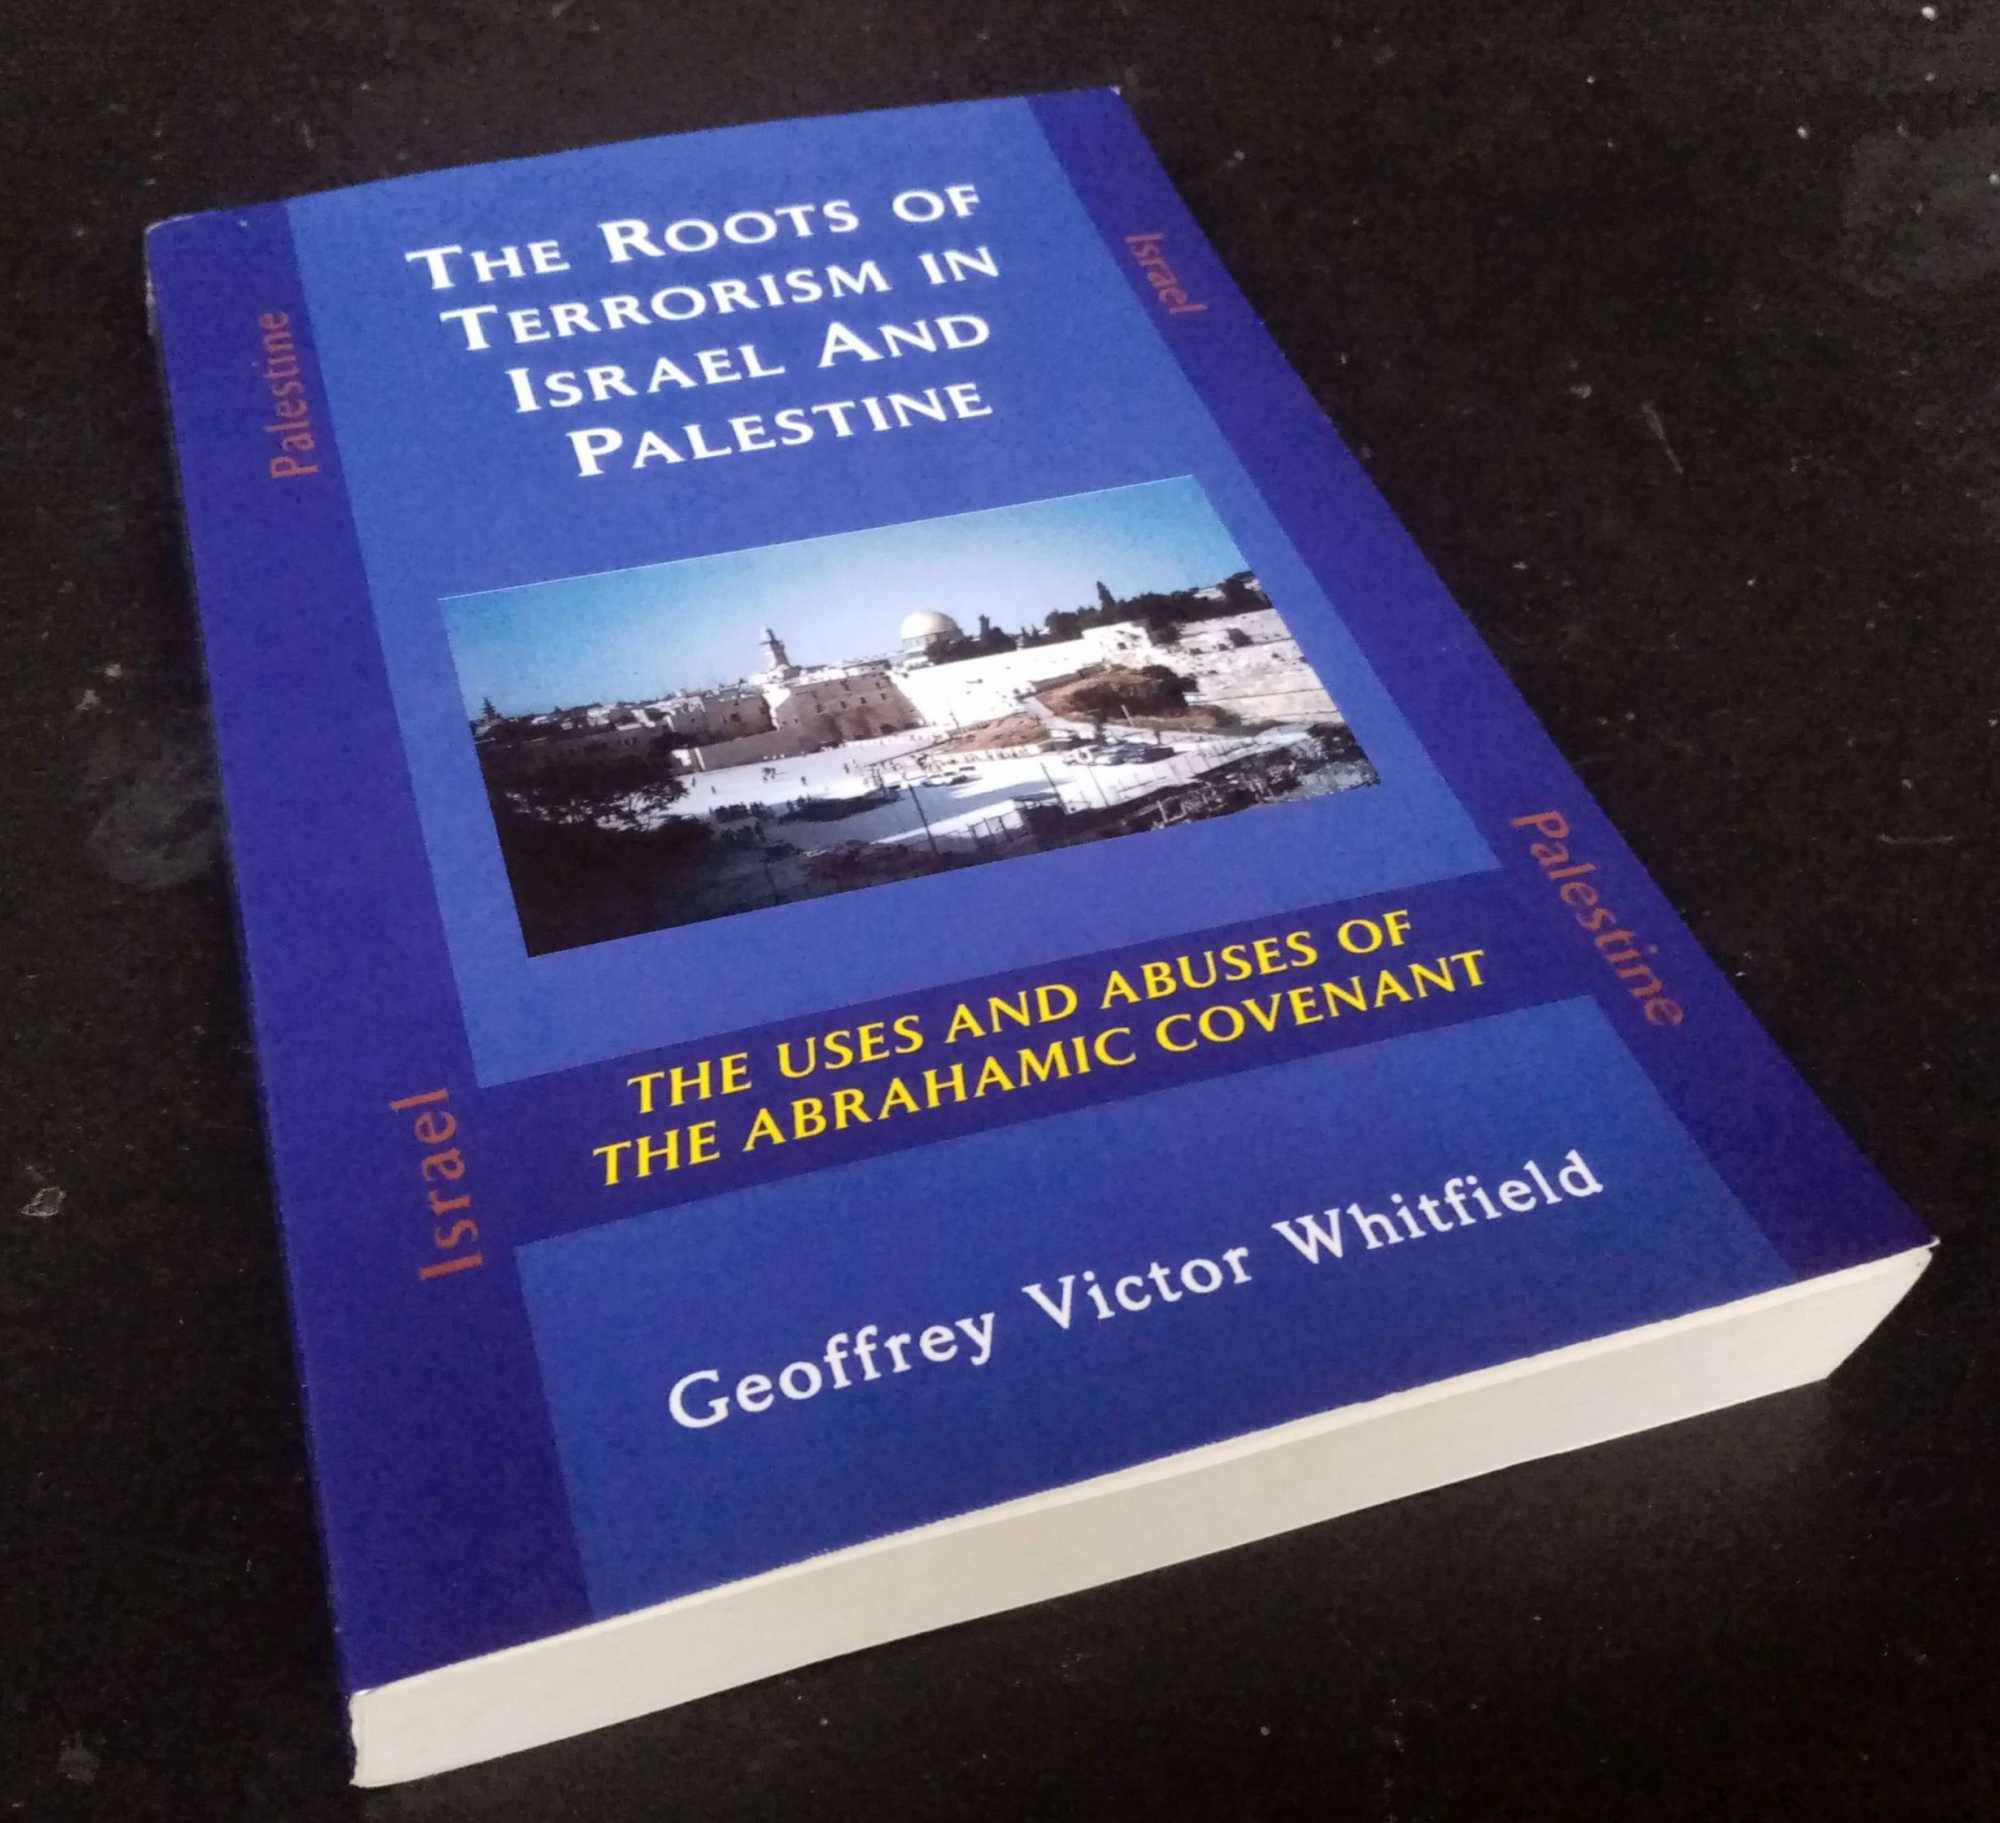 Geoffrey Whitfield - The Roots of Terrorism in Israel and Palestine. Uses and Abuses of the Abrahamic Covenant